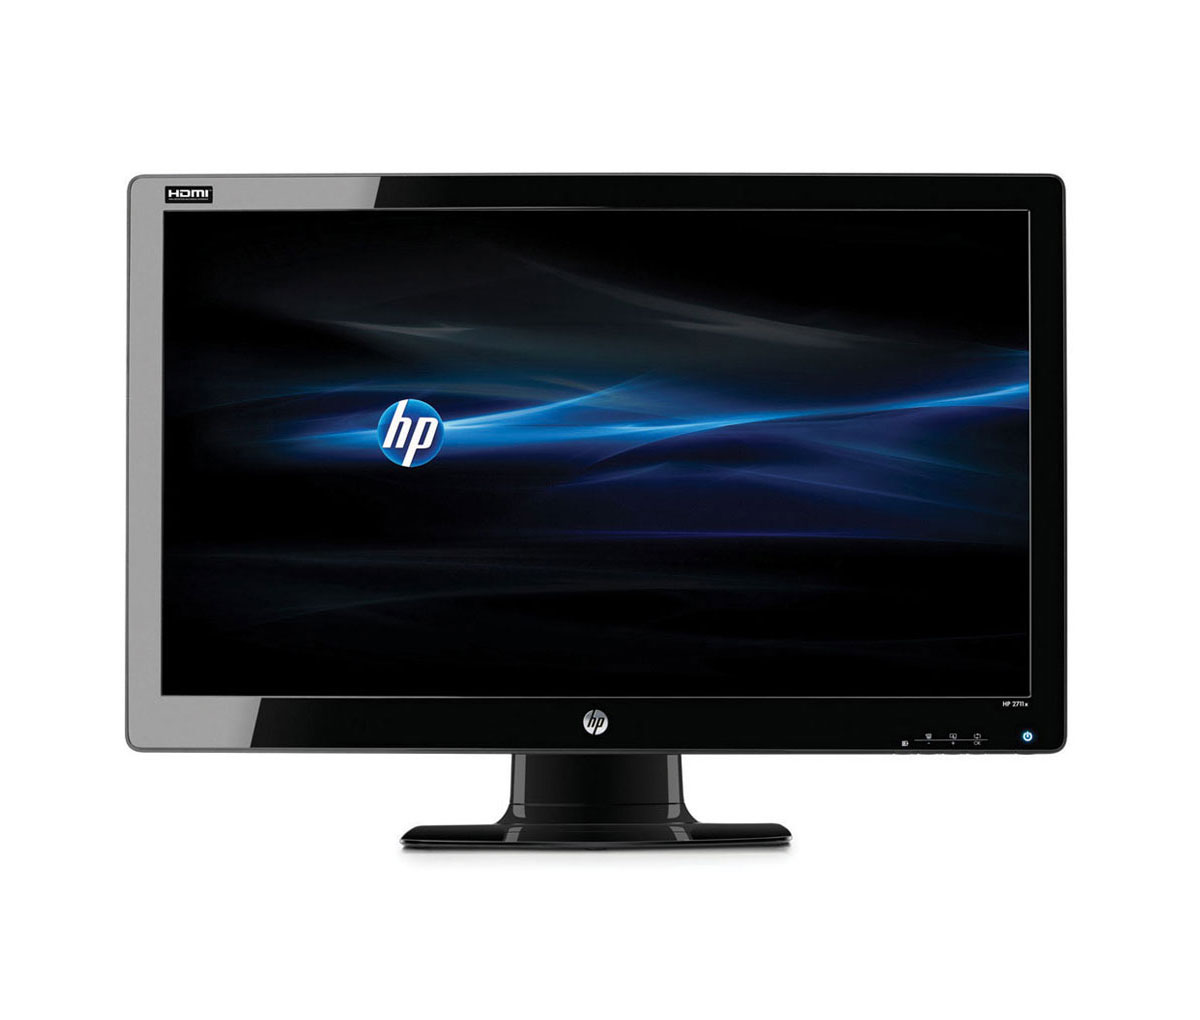 HP 2711x 27-inch LED Monitor Front View